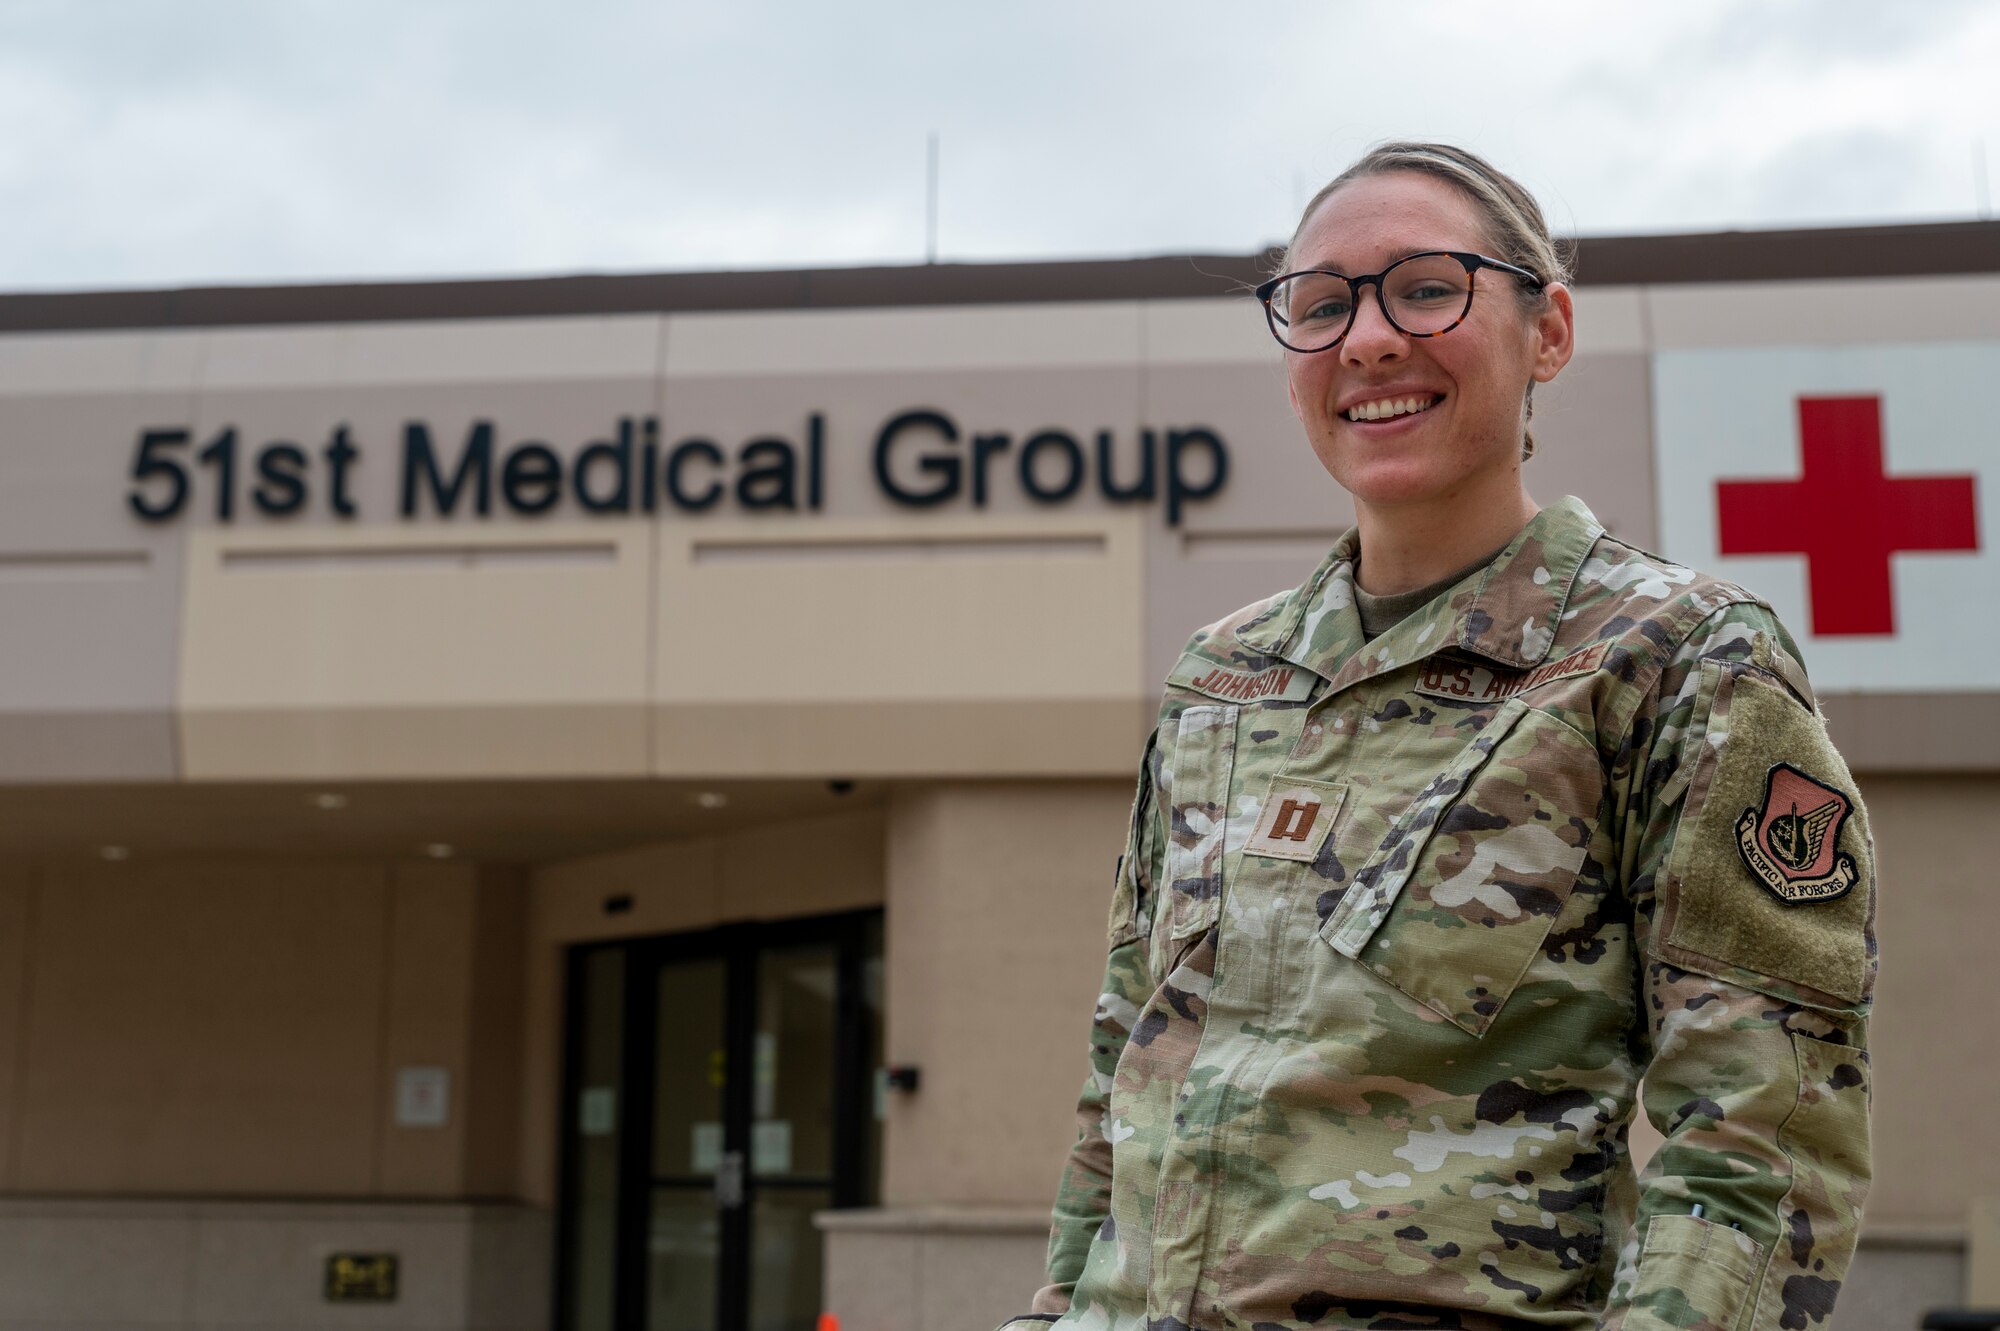 U.S. Air Force Capt. H. Marleen Johnson, 51st Medical Group (MDG) public health element chief, poses outside of the 51st MDG building at Osan Air Base, Republic of Korea, June 26, 2023.